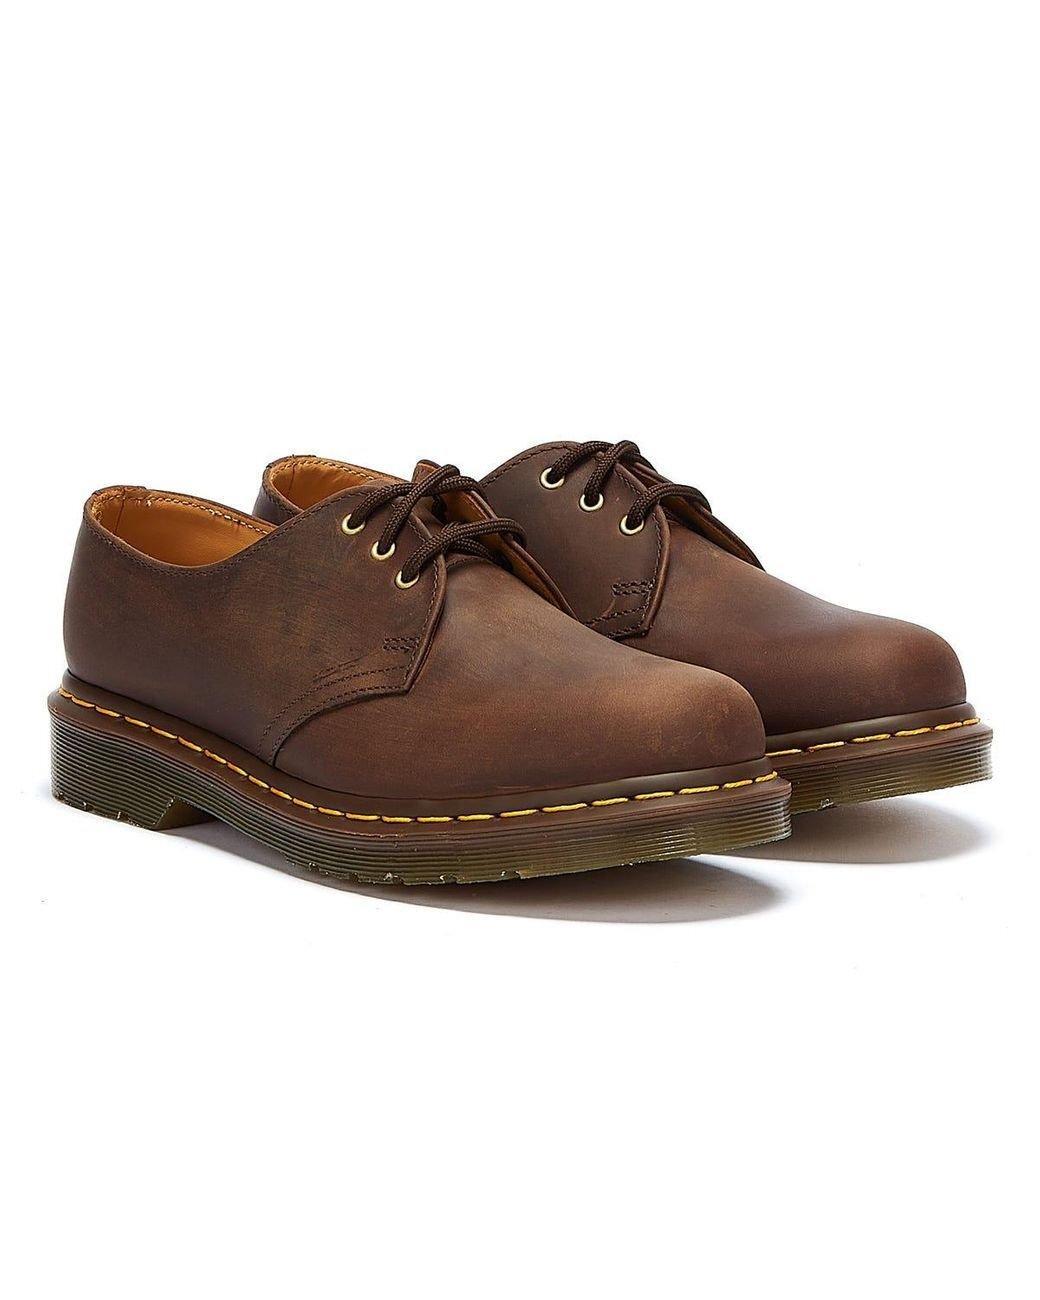 Dr. Martens 1461 Smooth Shoes Classic 3 Eye Lace Up Unisex - Dark Brown - UK 5